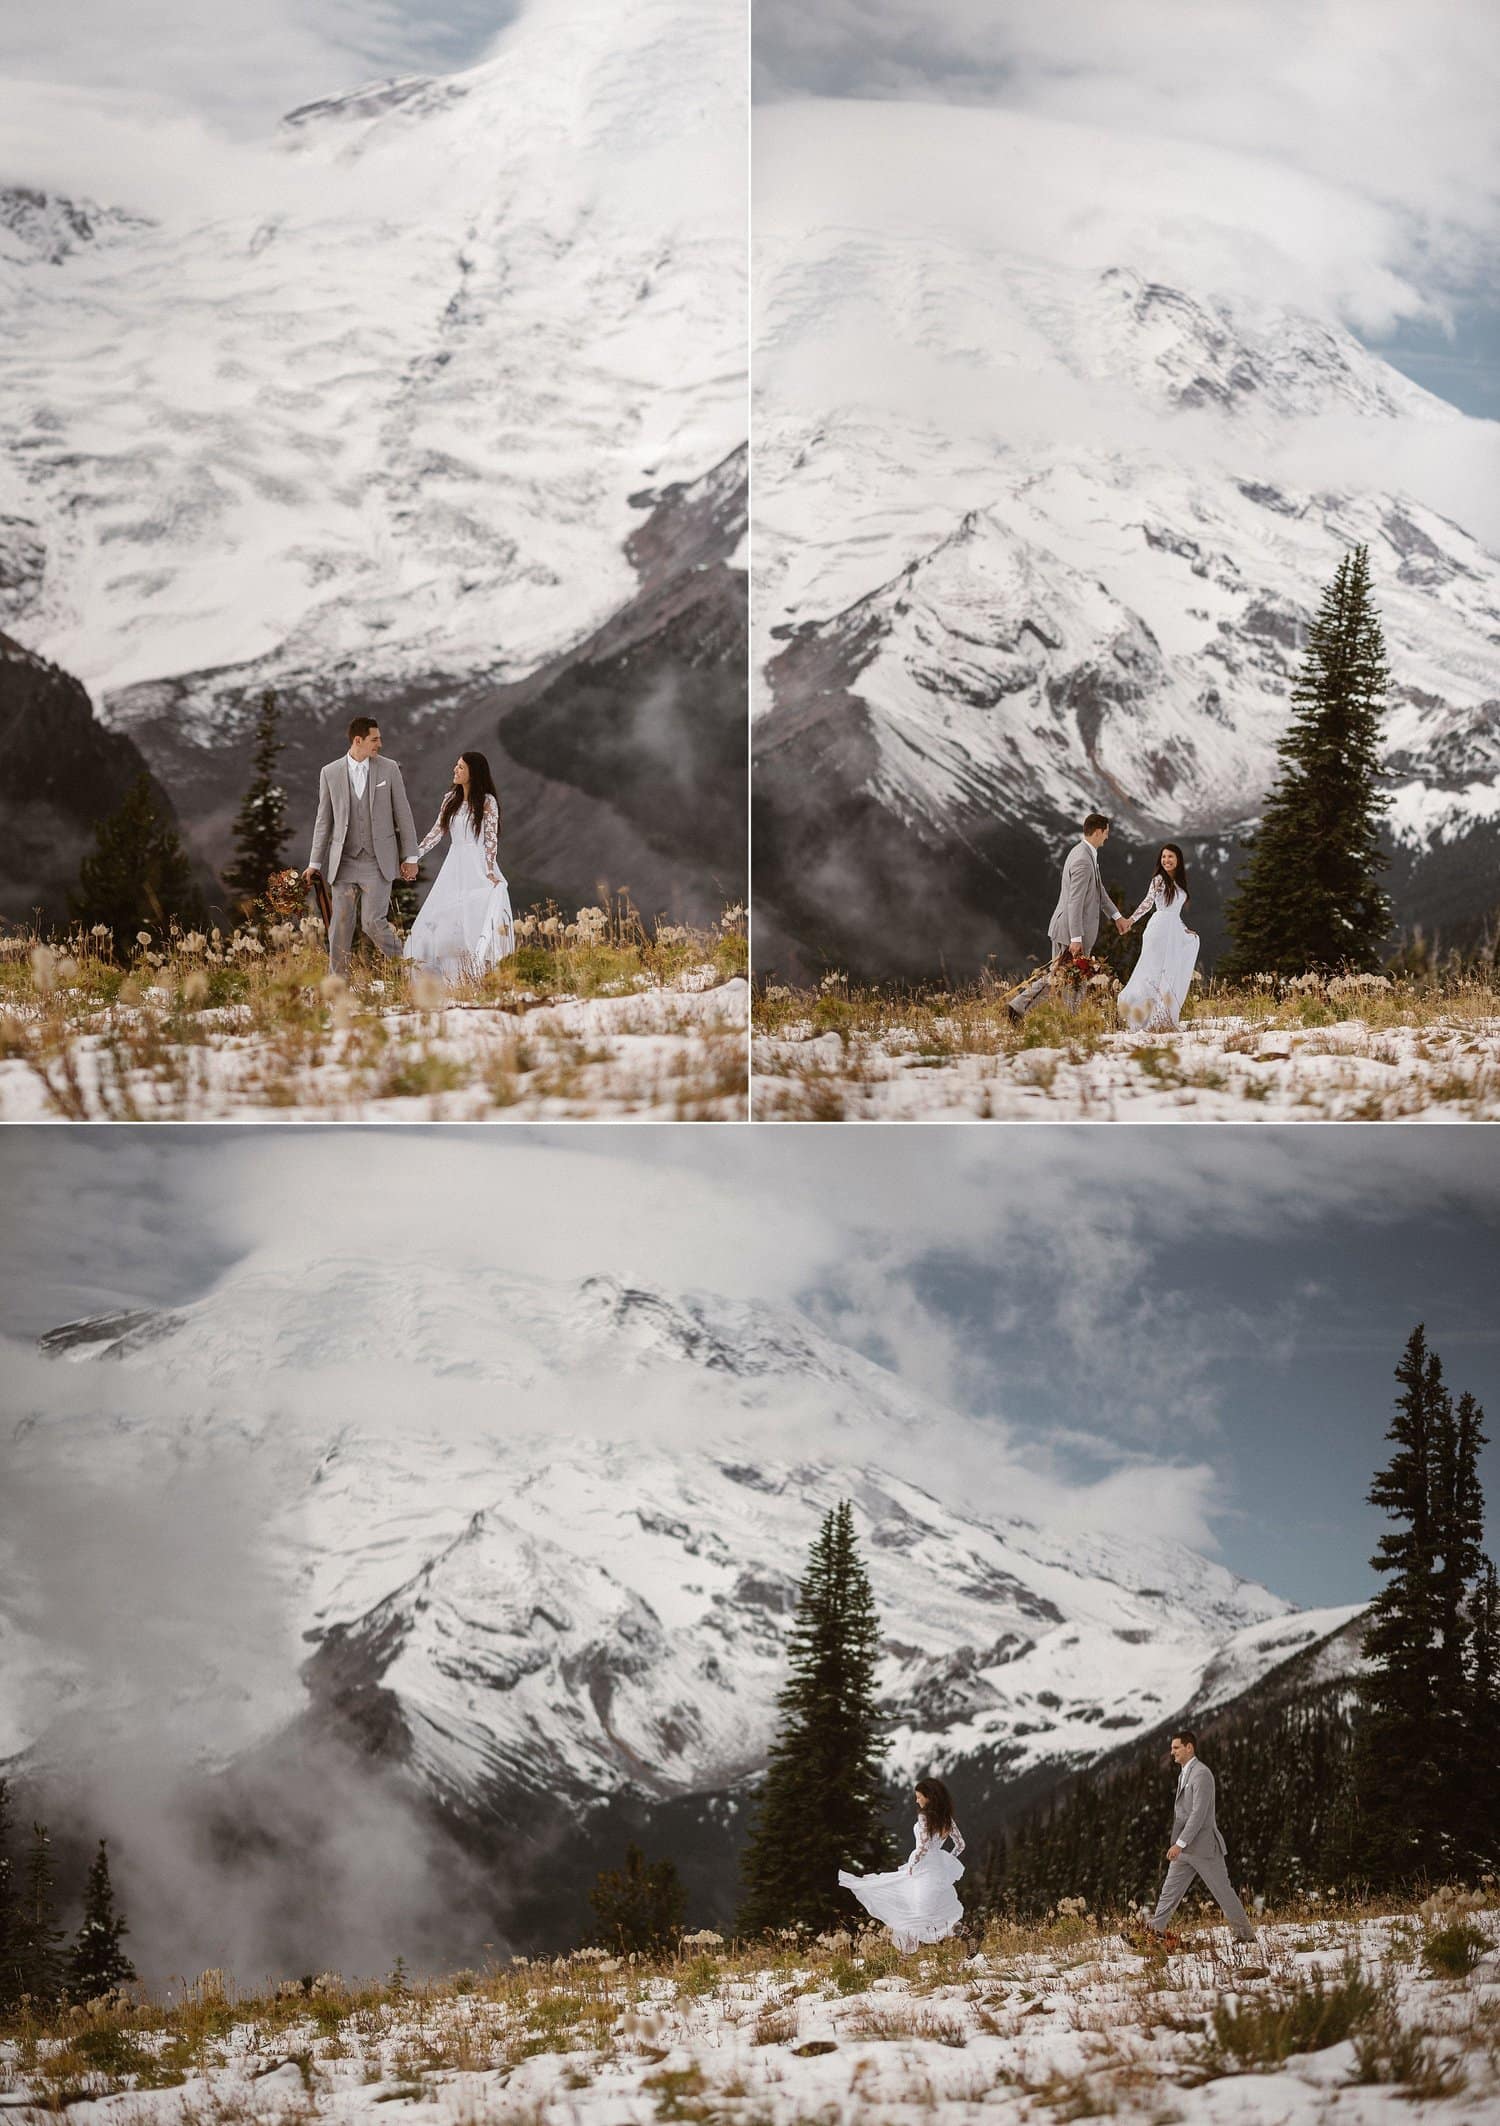 Bride and groom walk through snowy meadow at Mt. Rainier National Park. There are snow-capped mountains and trees in the background. 